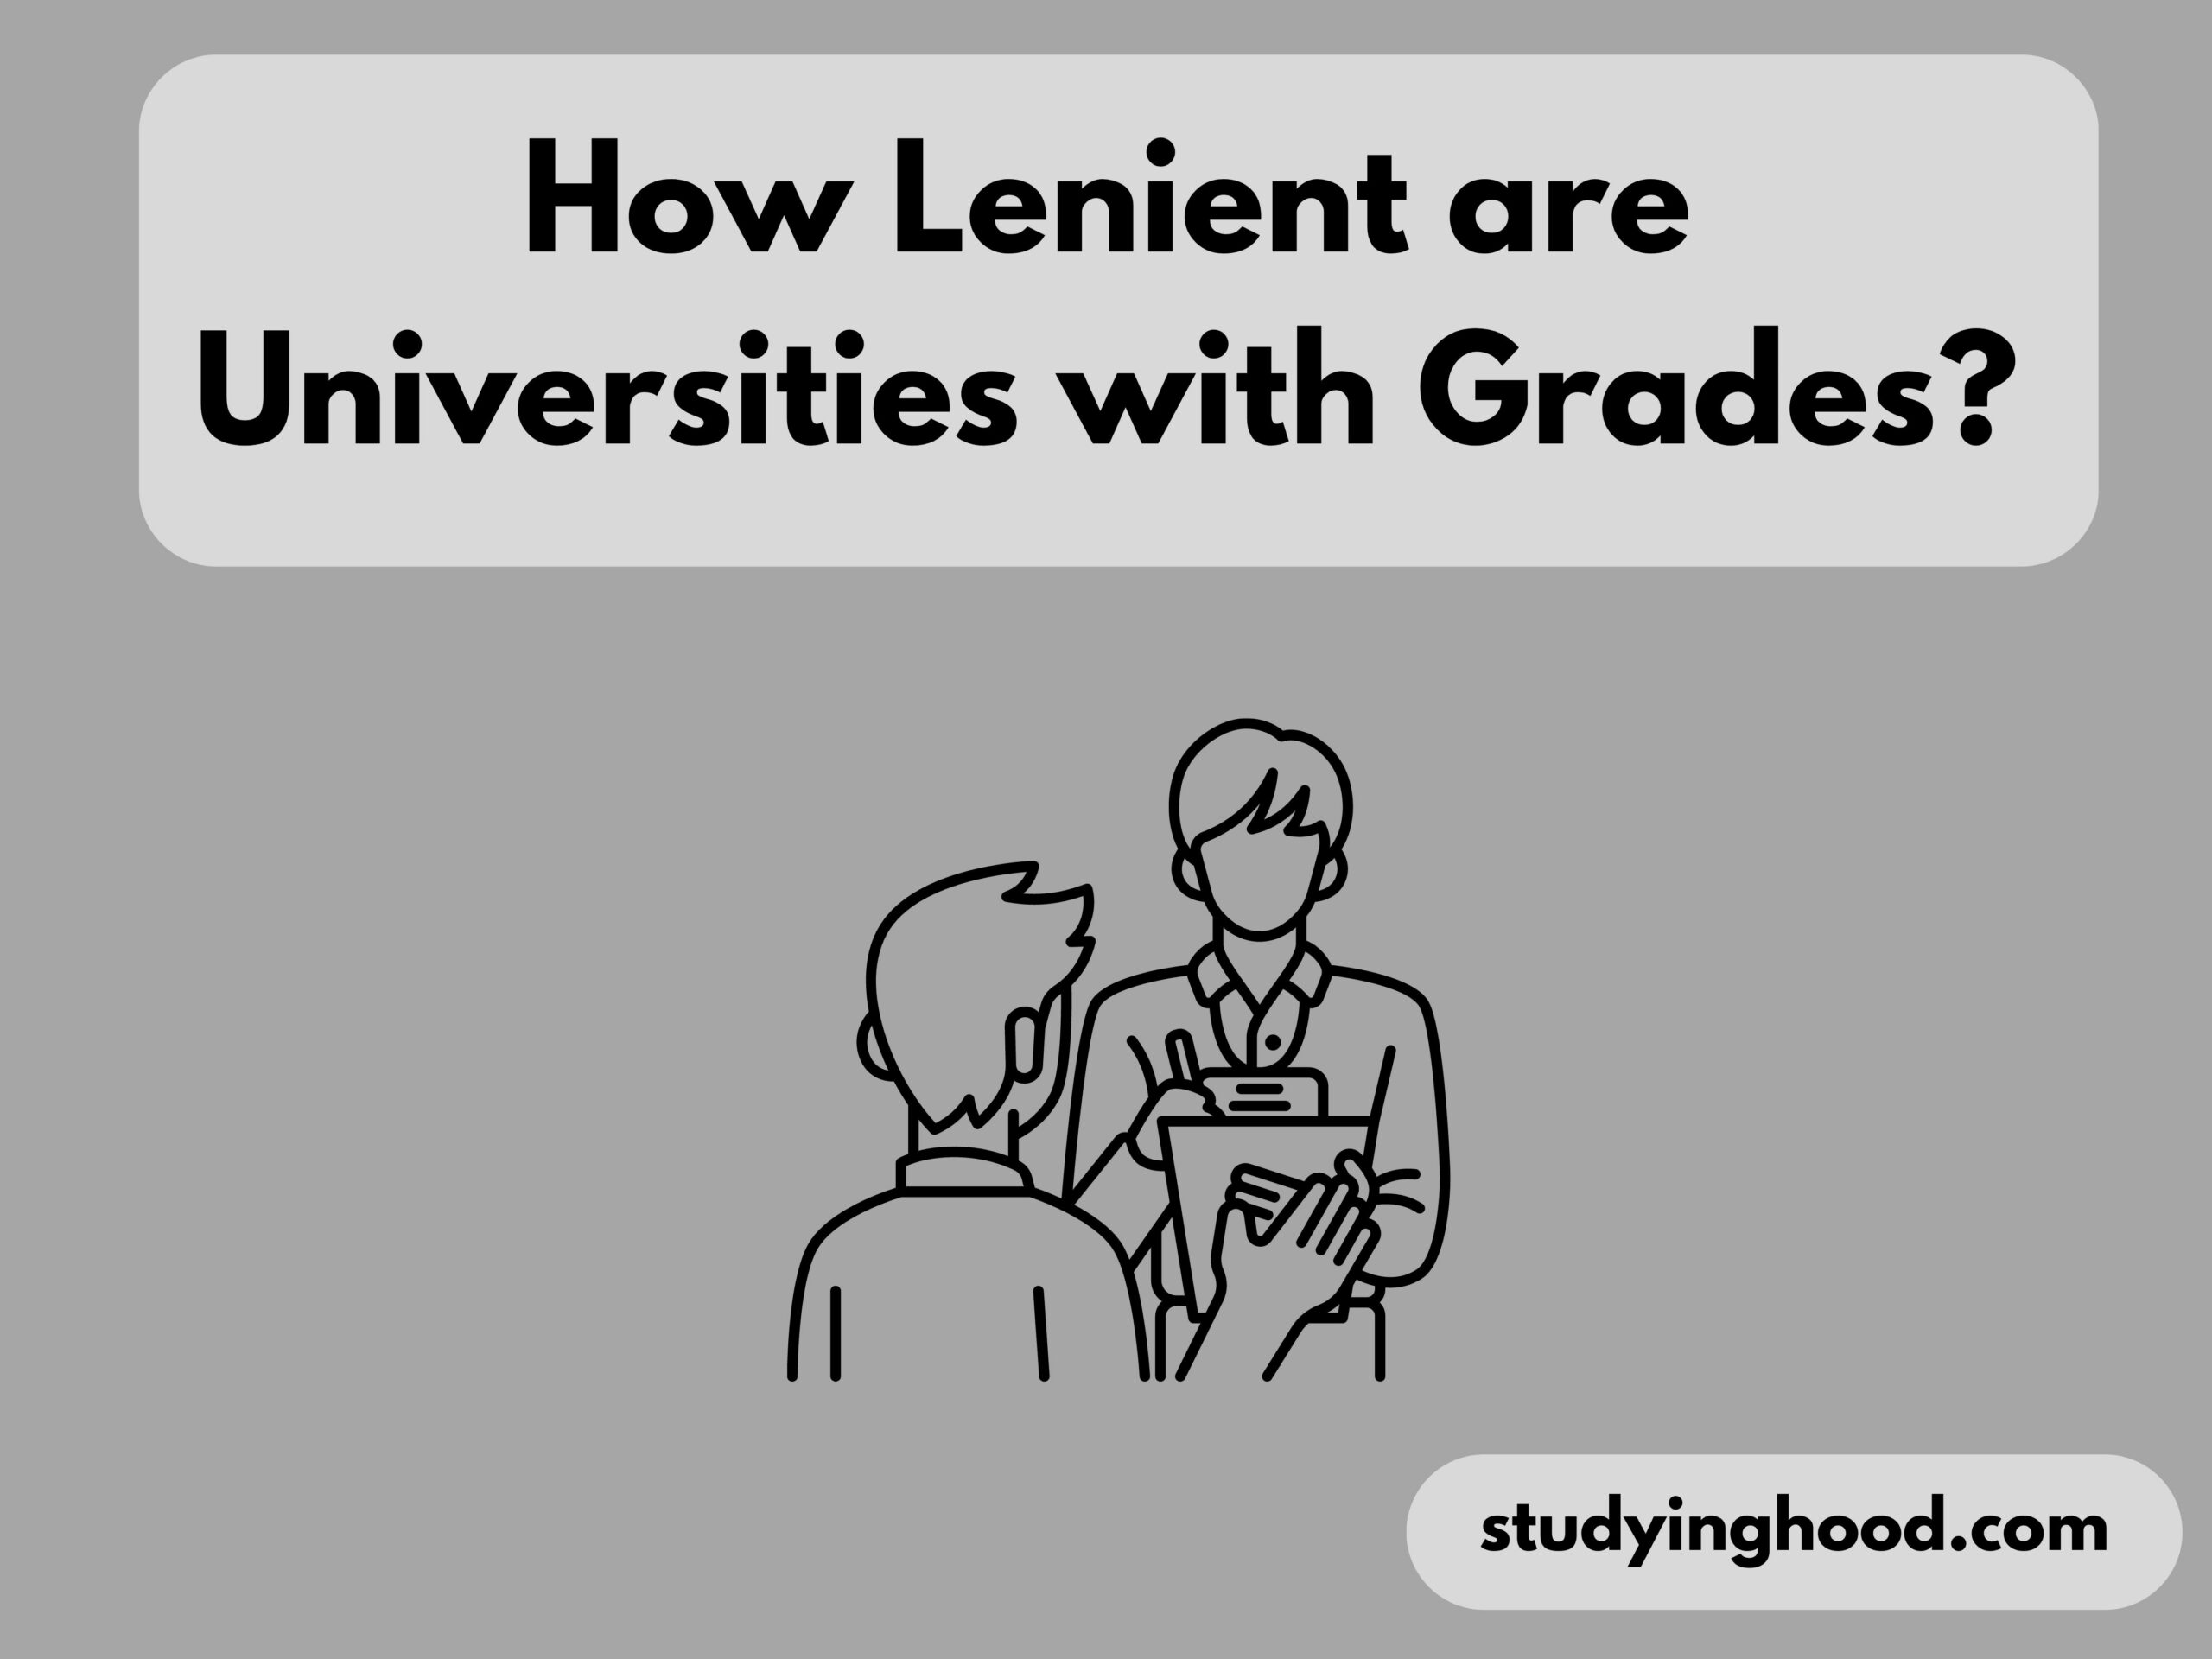 How Lenient are Universities with Grades